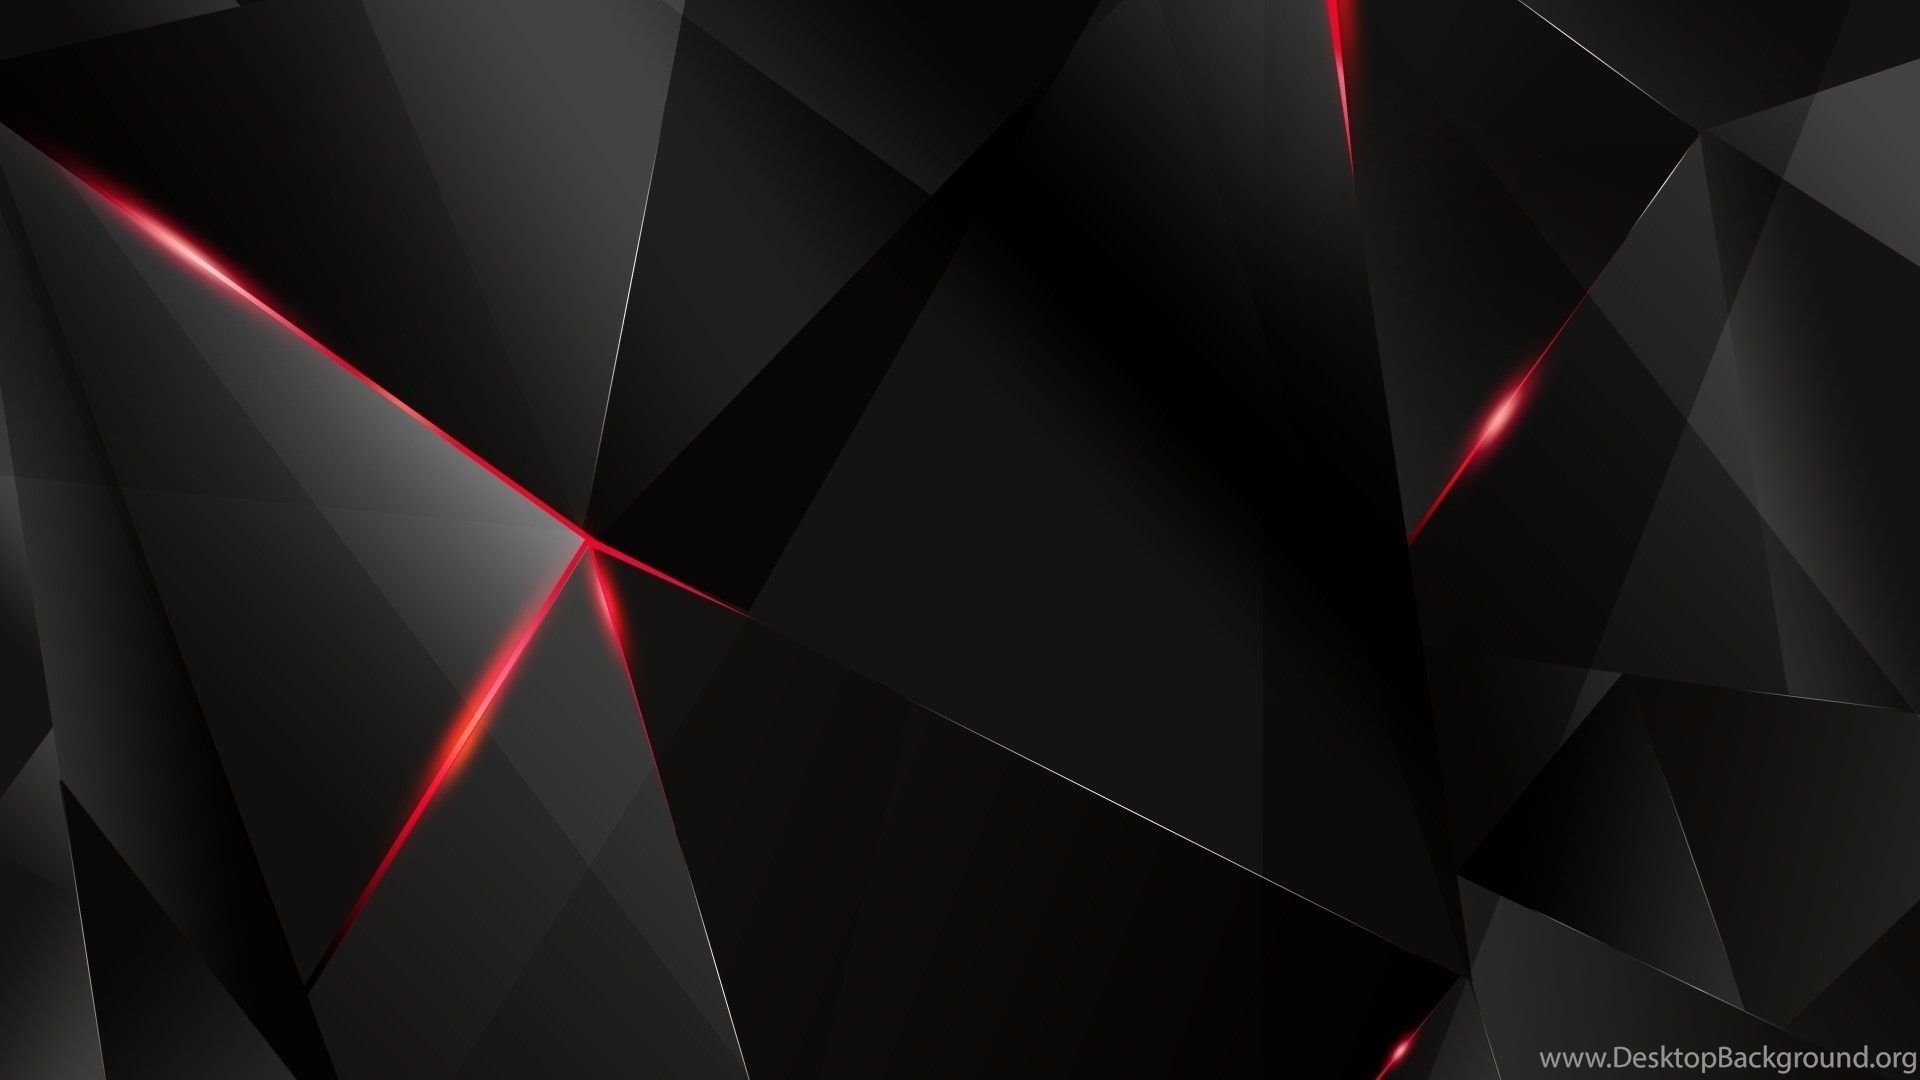 Cool Black And Red Background 1920x1080 Wallpaper Teahub Io